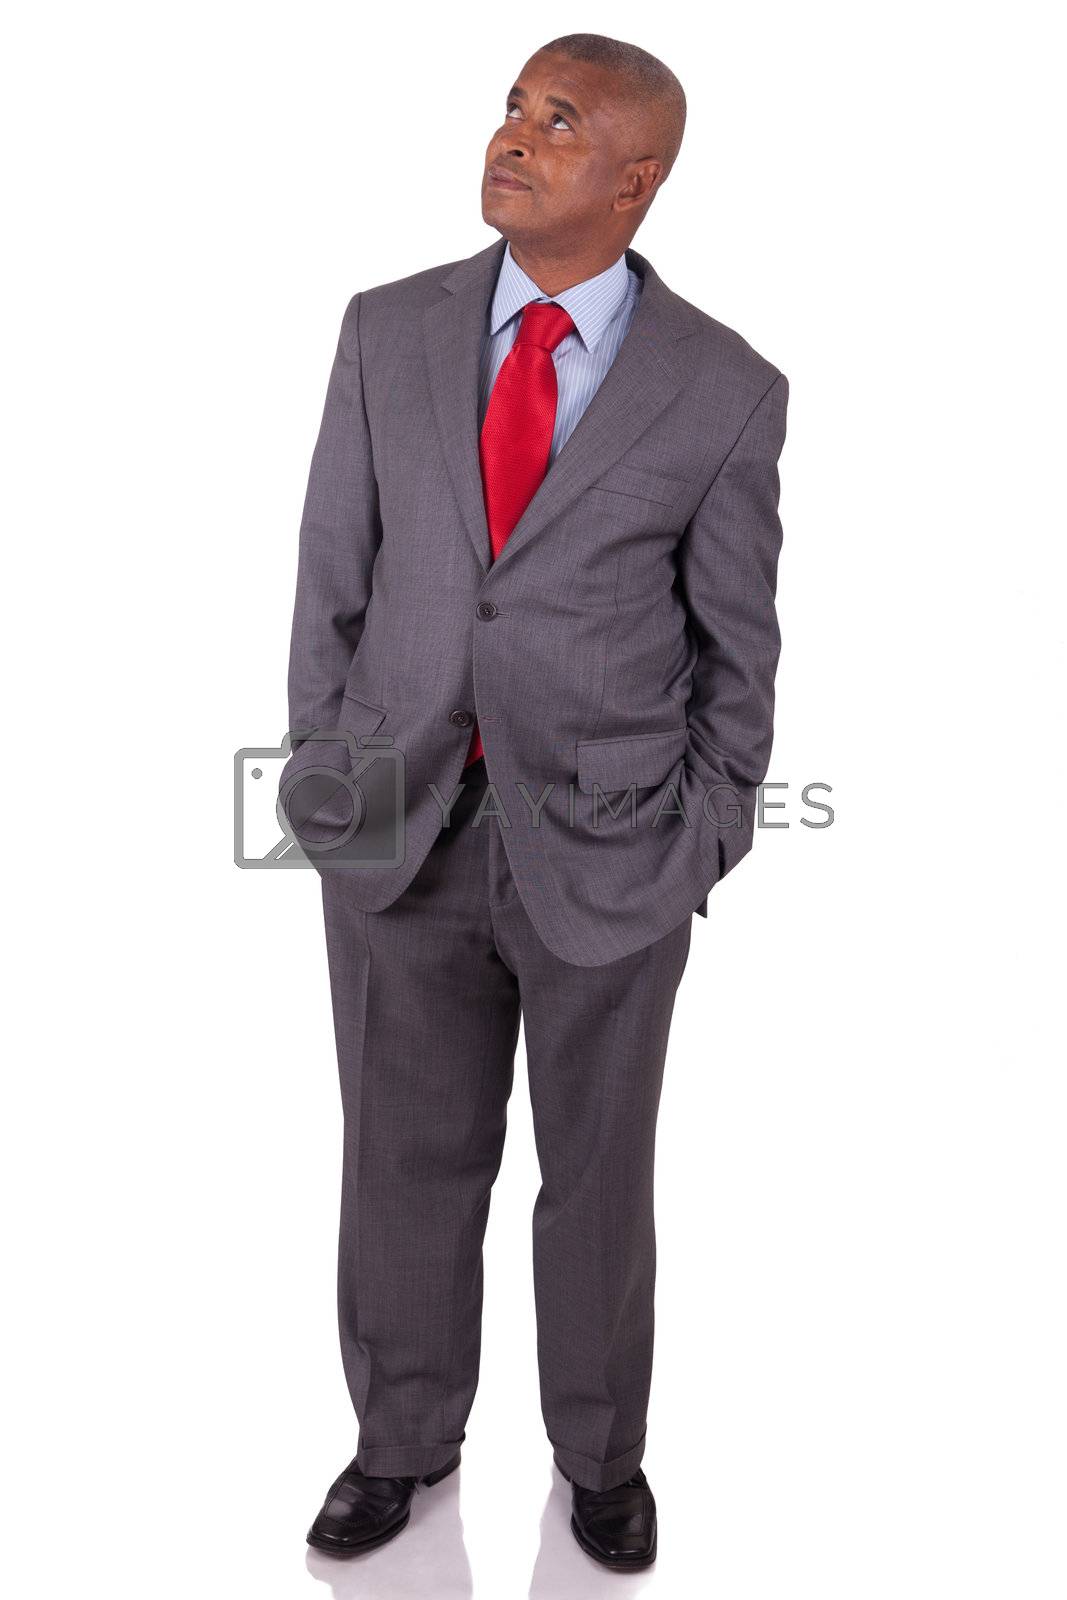 Royalty free image of American business man standing on white with hands in pocket by michel74100